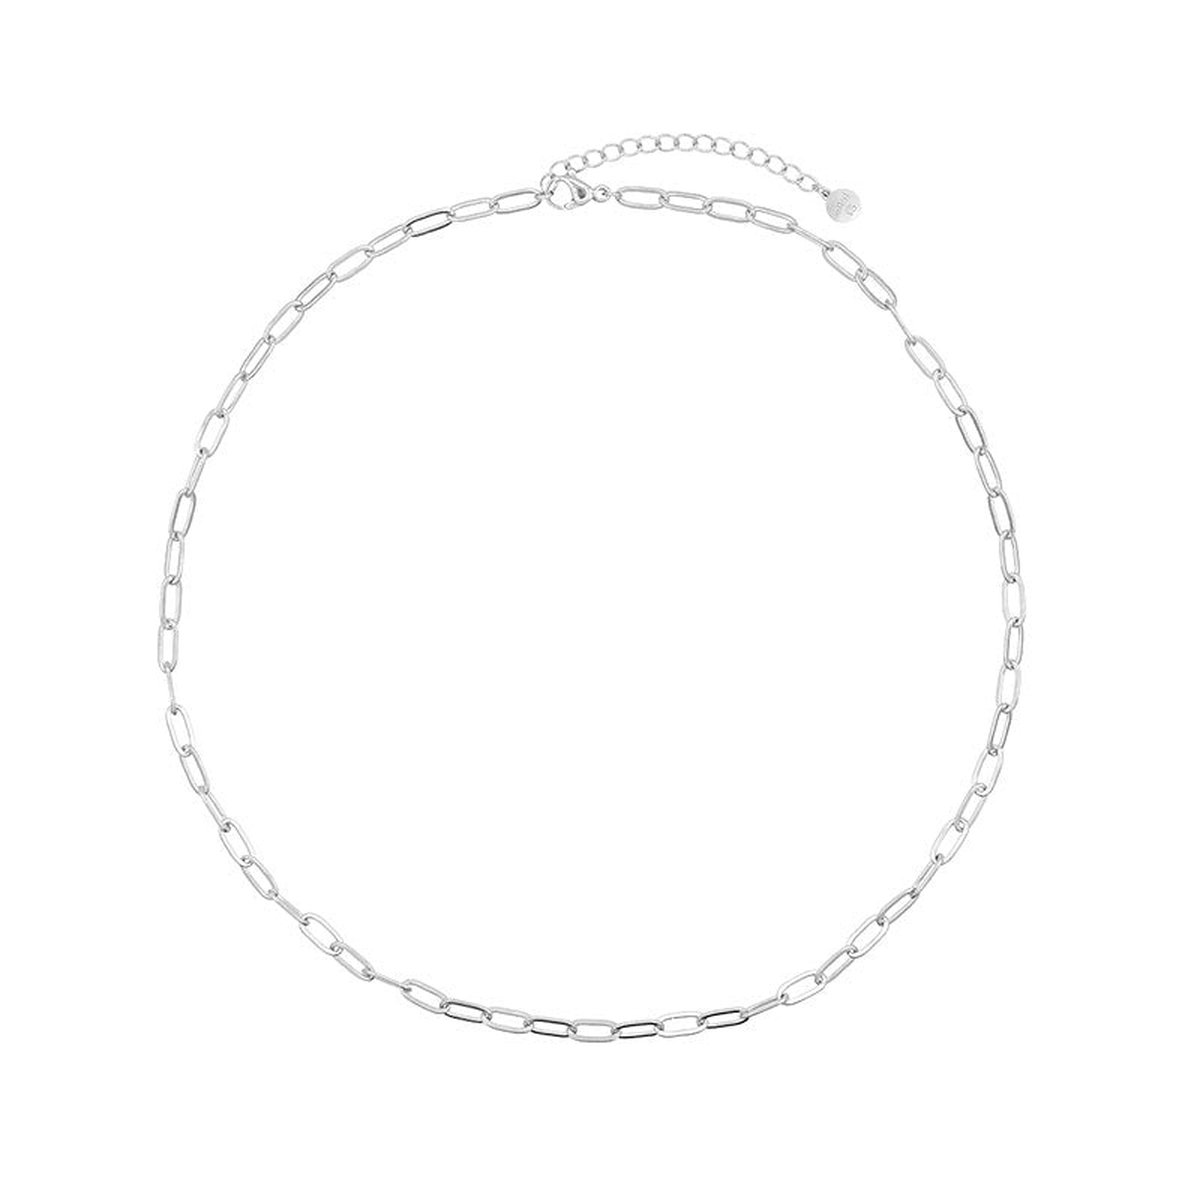 Mint15 Ketting 'Chain Necklace' - Zilver RVS/Stainless Steel